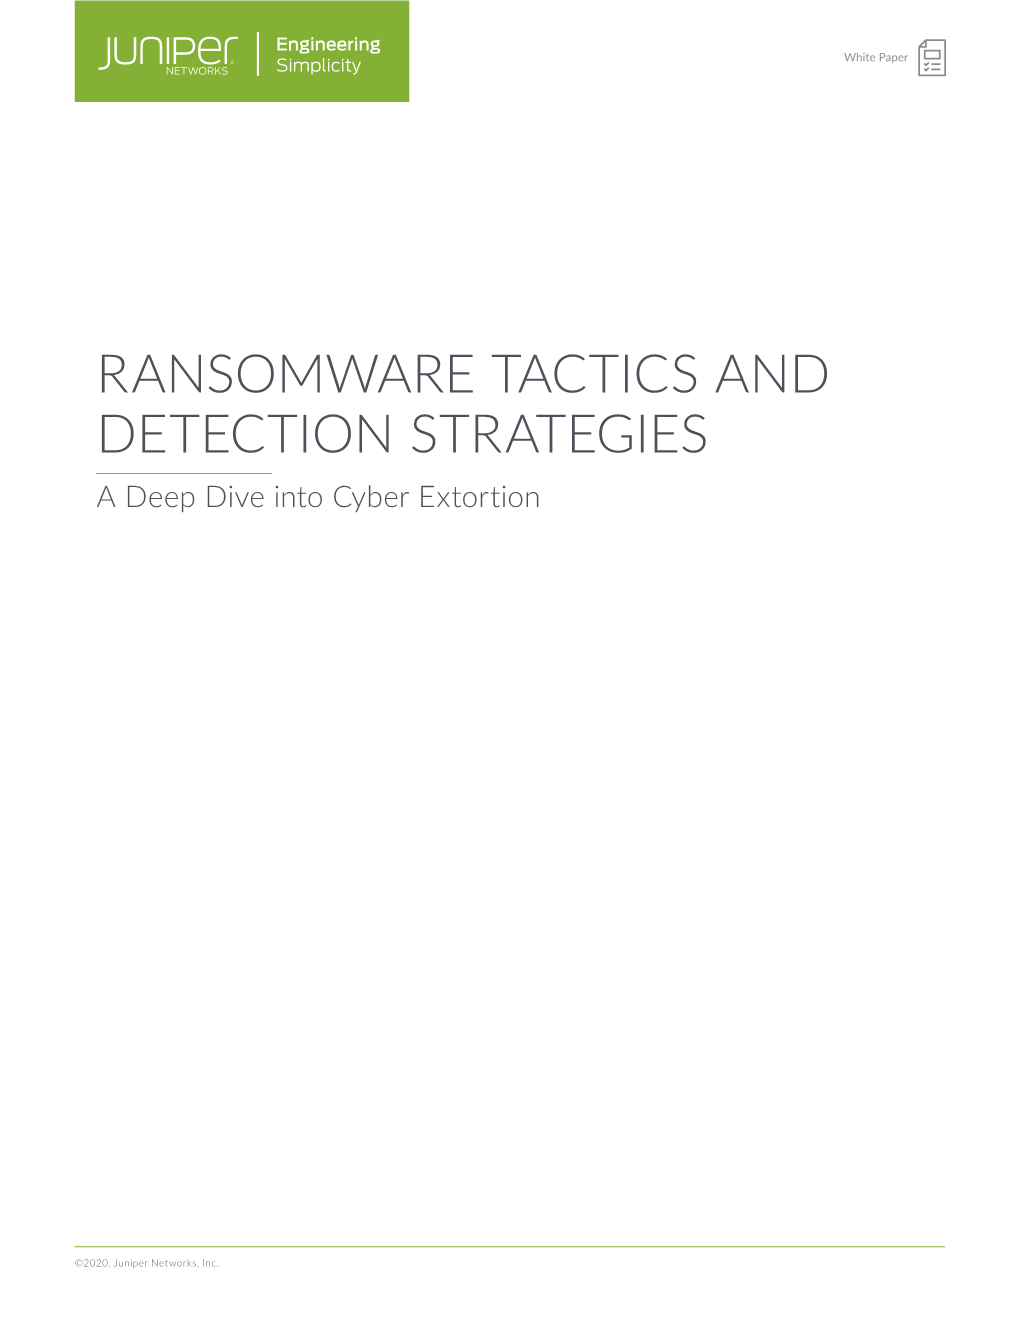 RANSOMWARE TACTICS and DETECTION STRATEGIES a Deep Dive Into Cyber Extortion